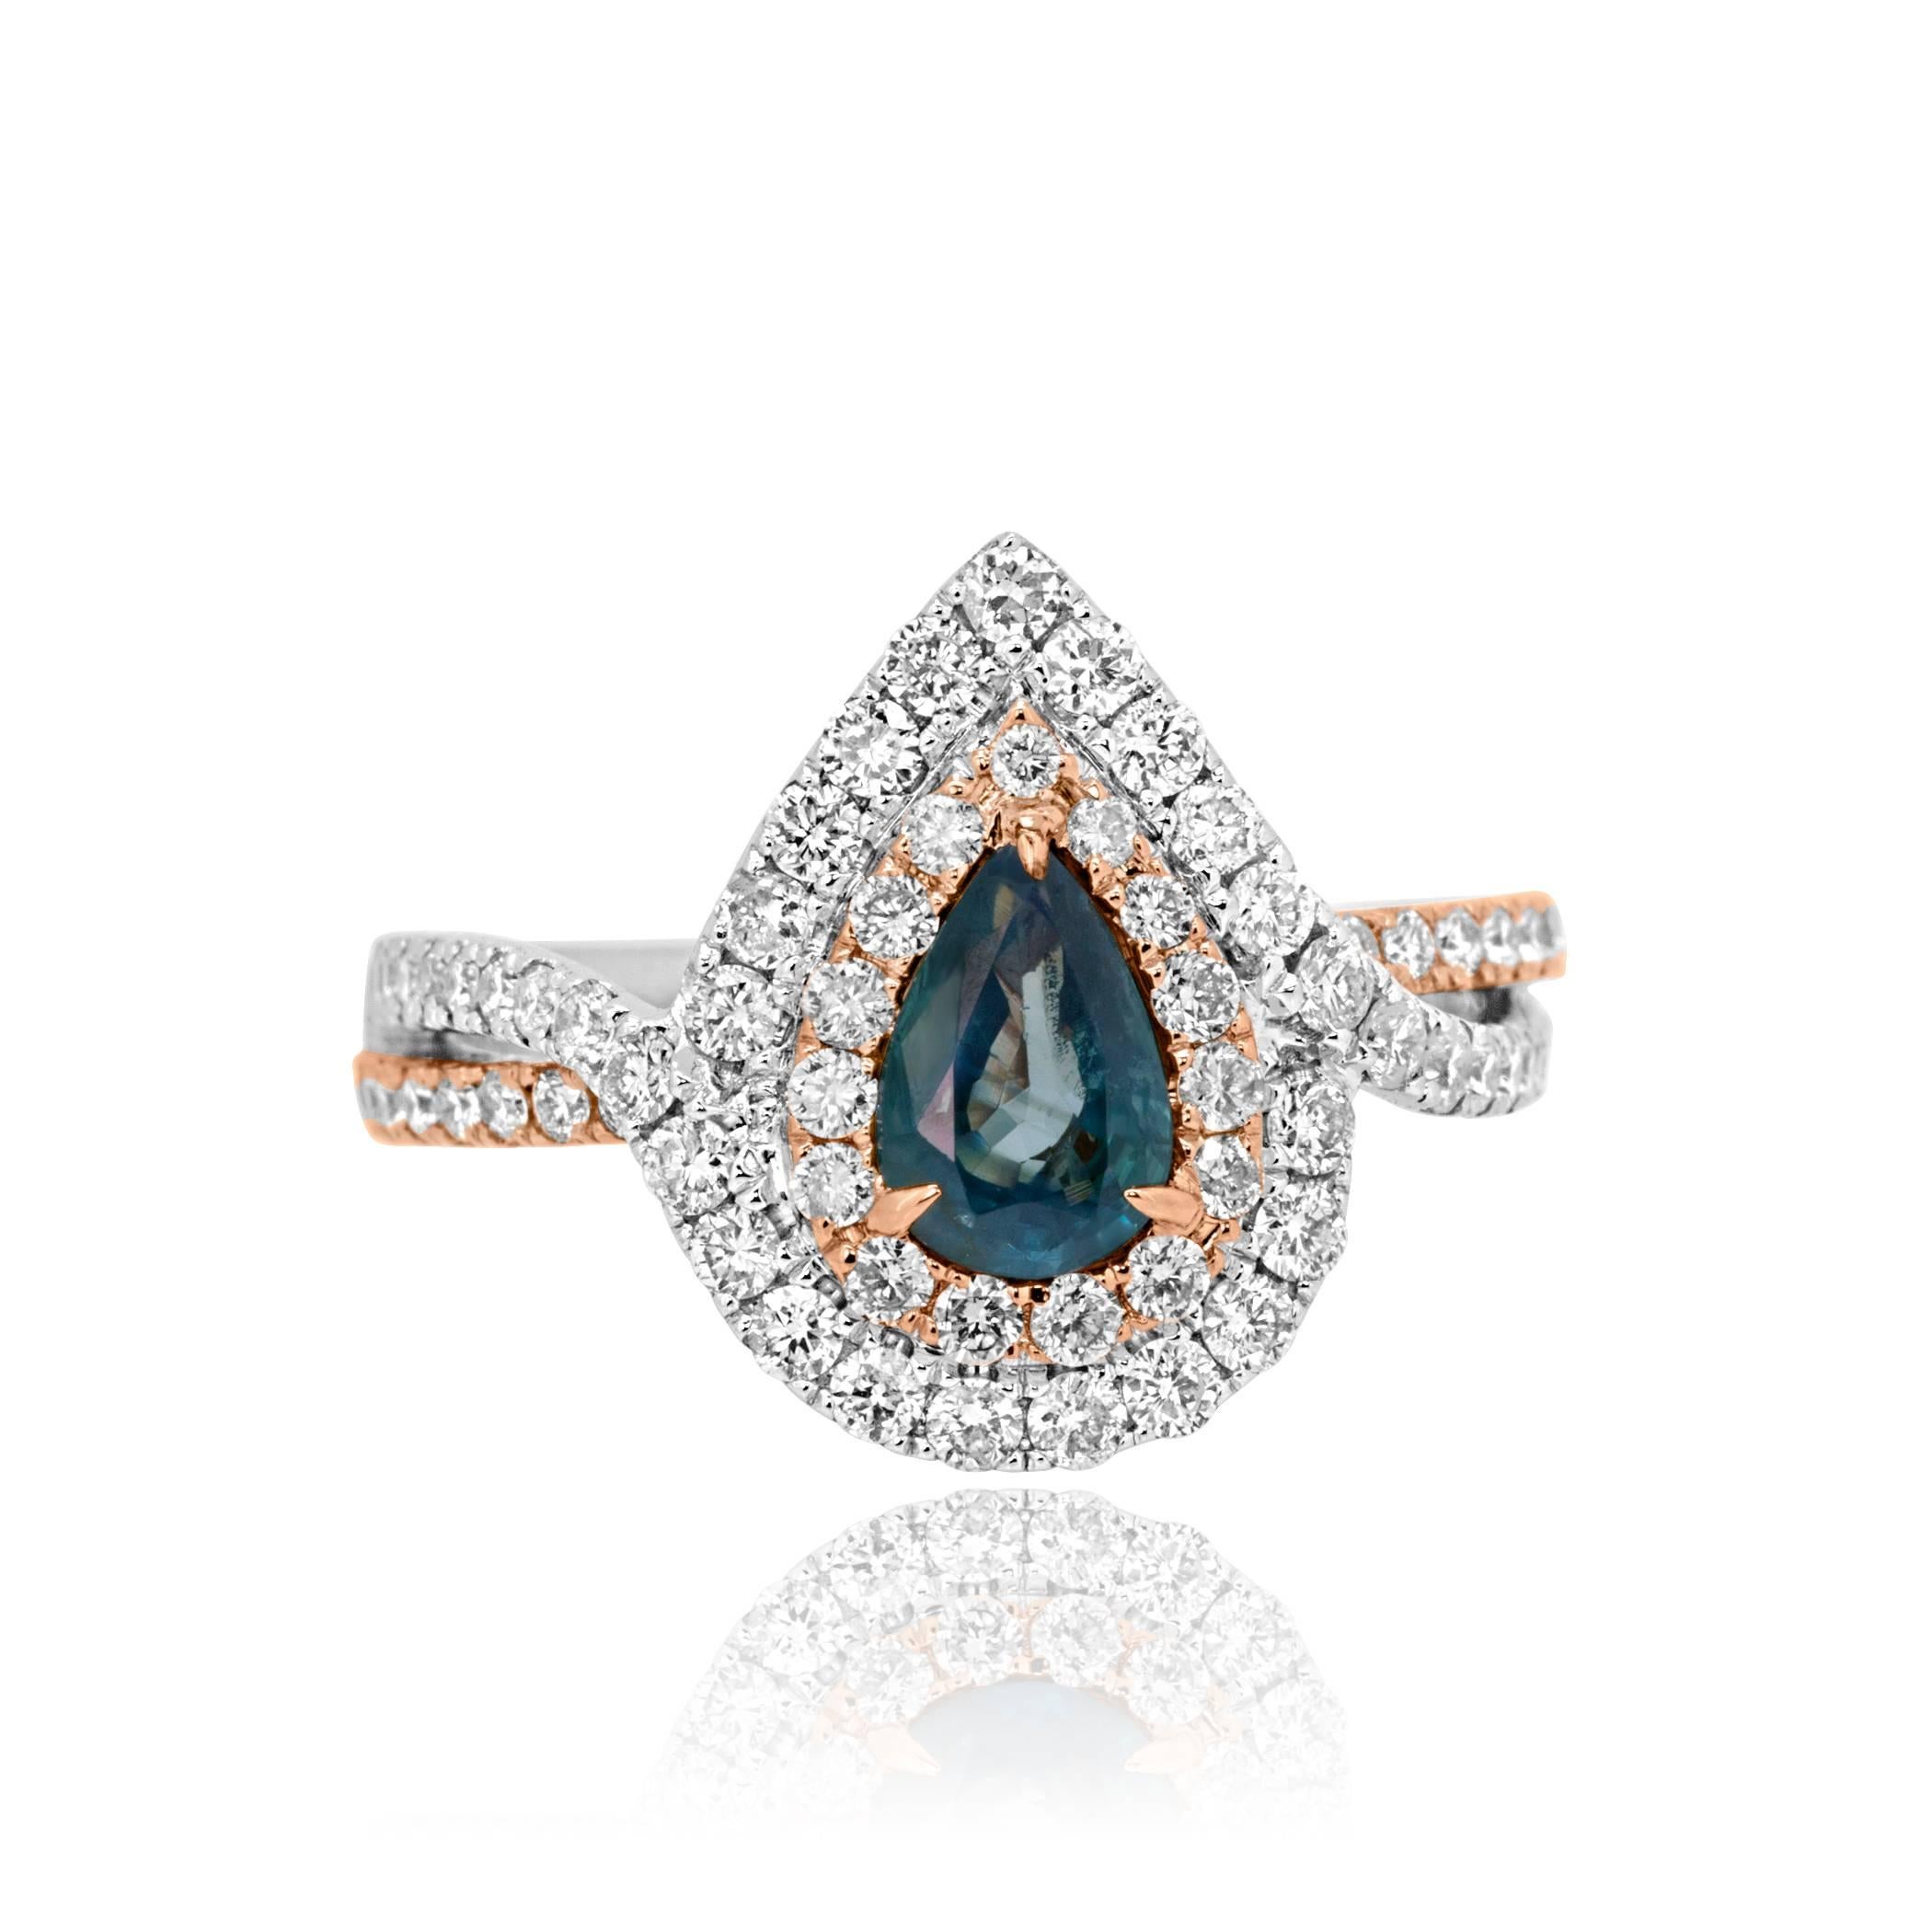 0.95 Carat Pear Shape Good Color Change Alexandrite Encircled in a Double Halo of white Diamonds 0.95 Carat in 18K White and Rose Gold.